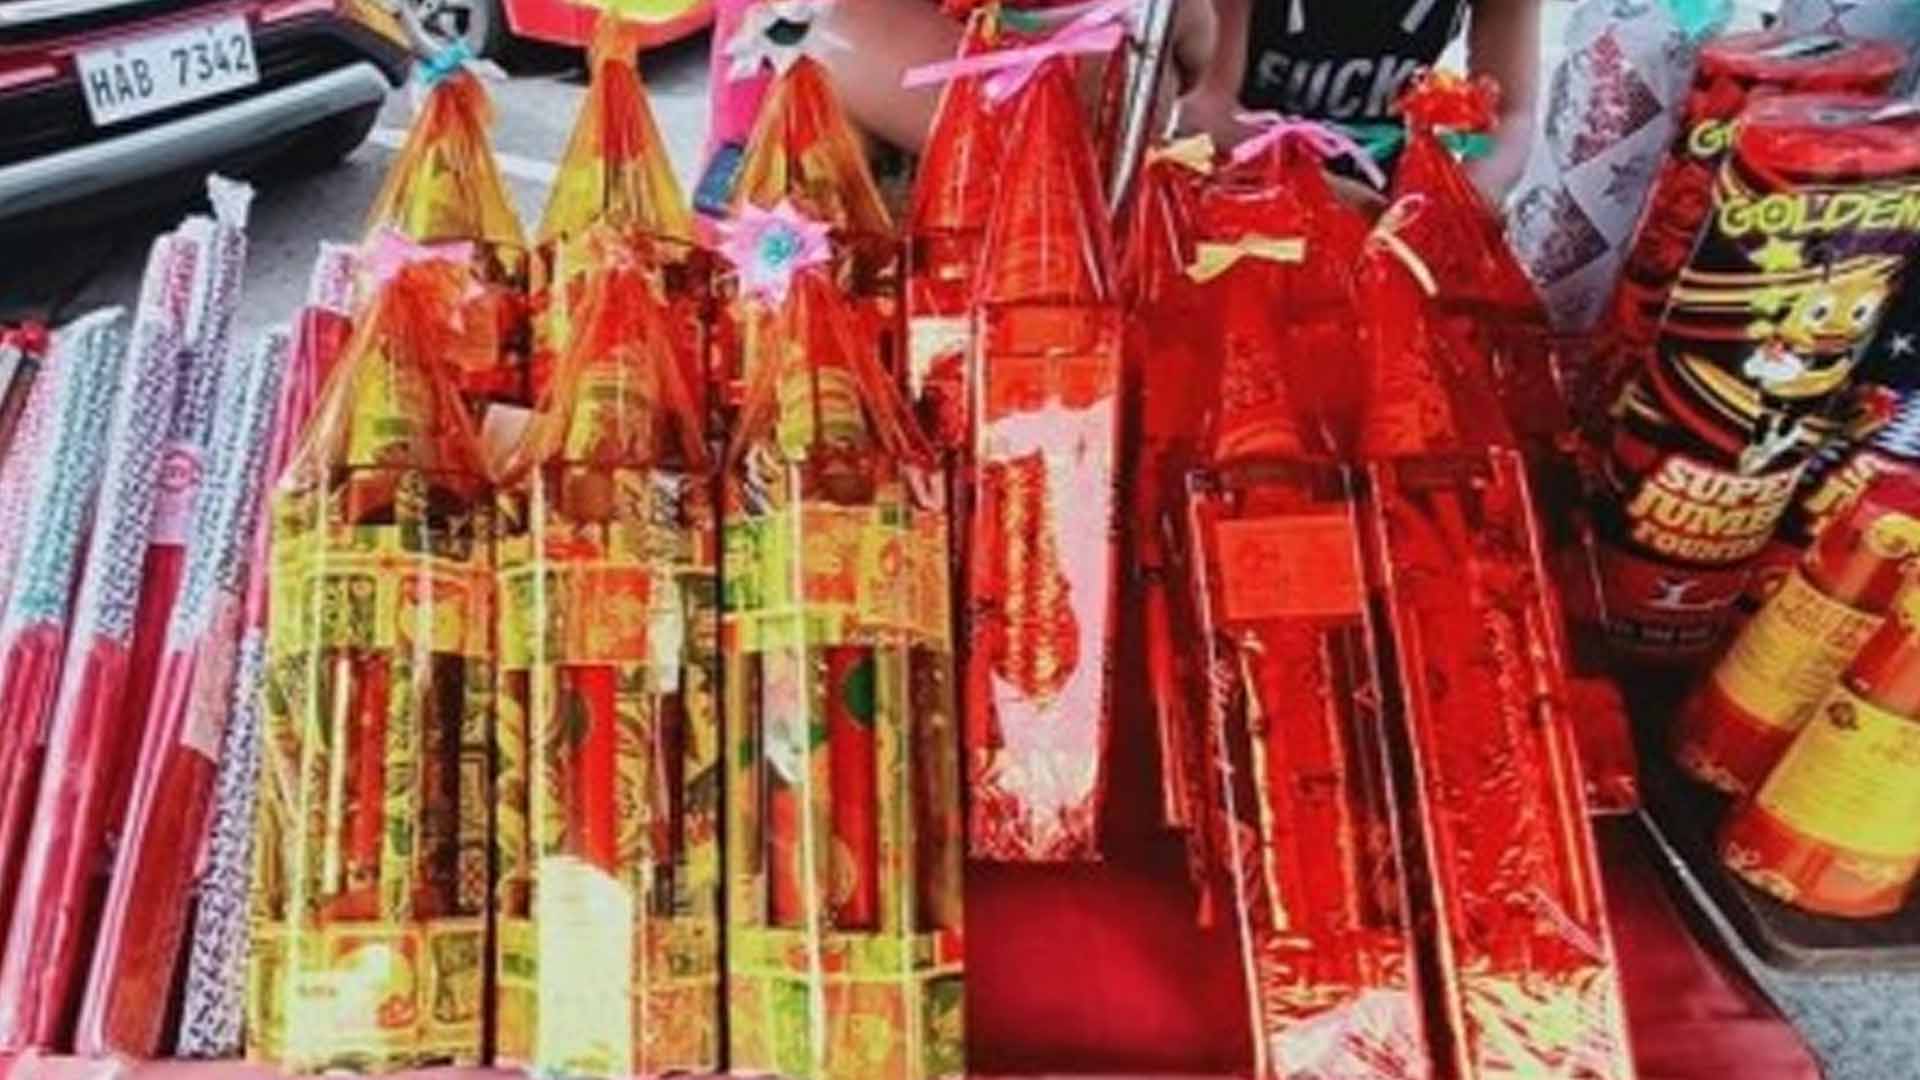 E. Visayas Achieves Zero Fireworks Injuries For First Time